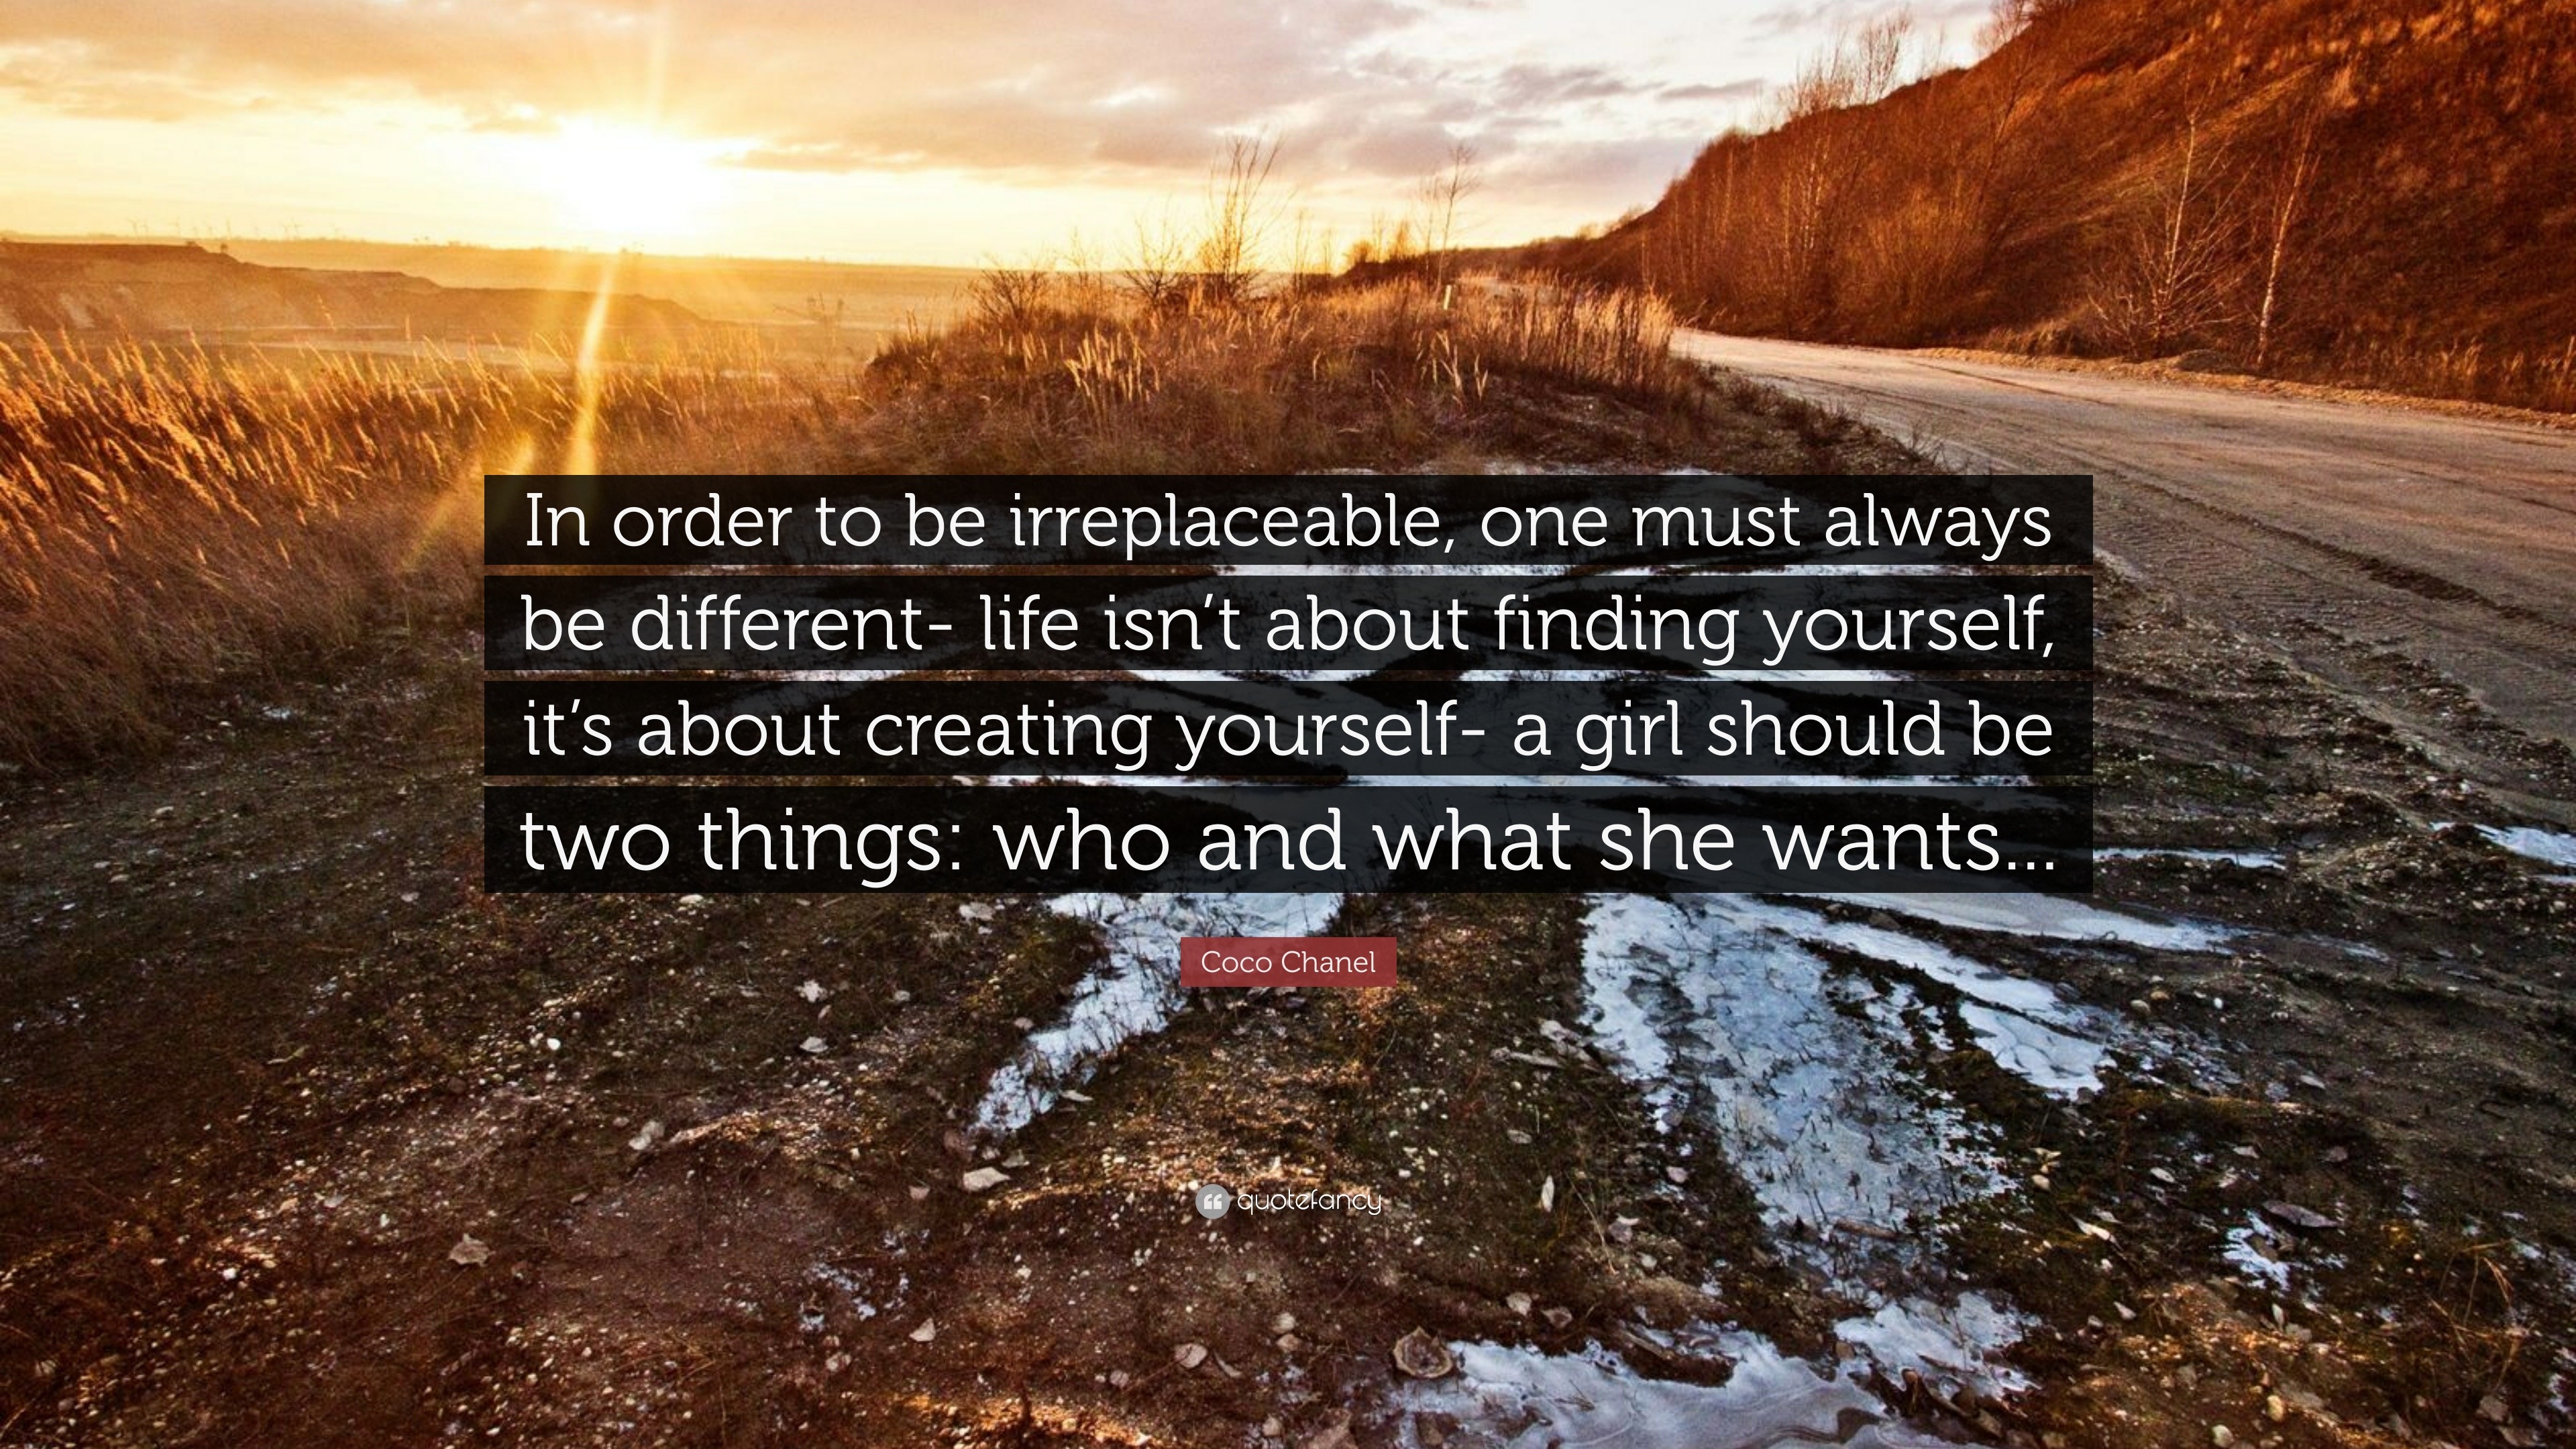 Coco Chanel Quote: “In order to be irreplaceable, one must always